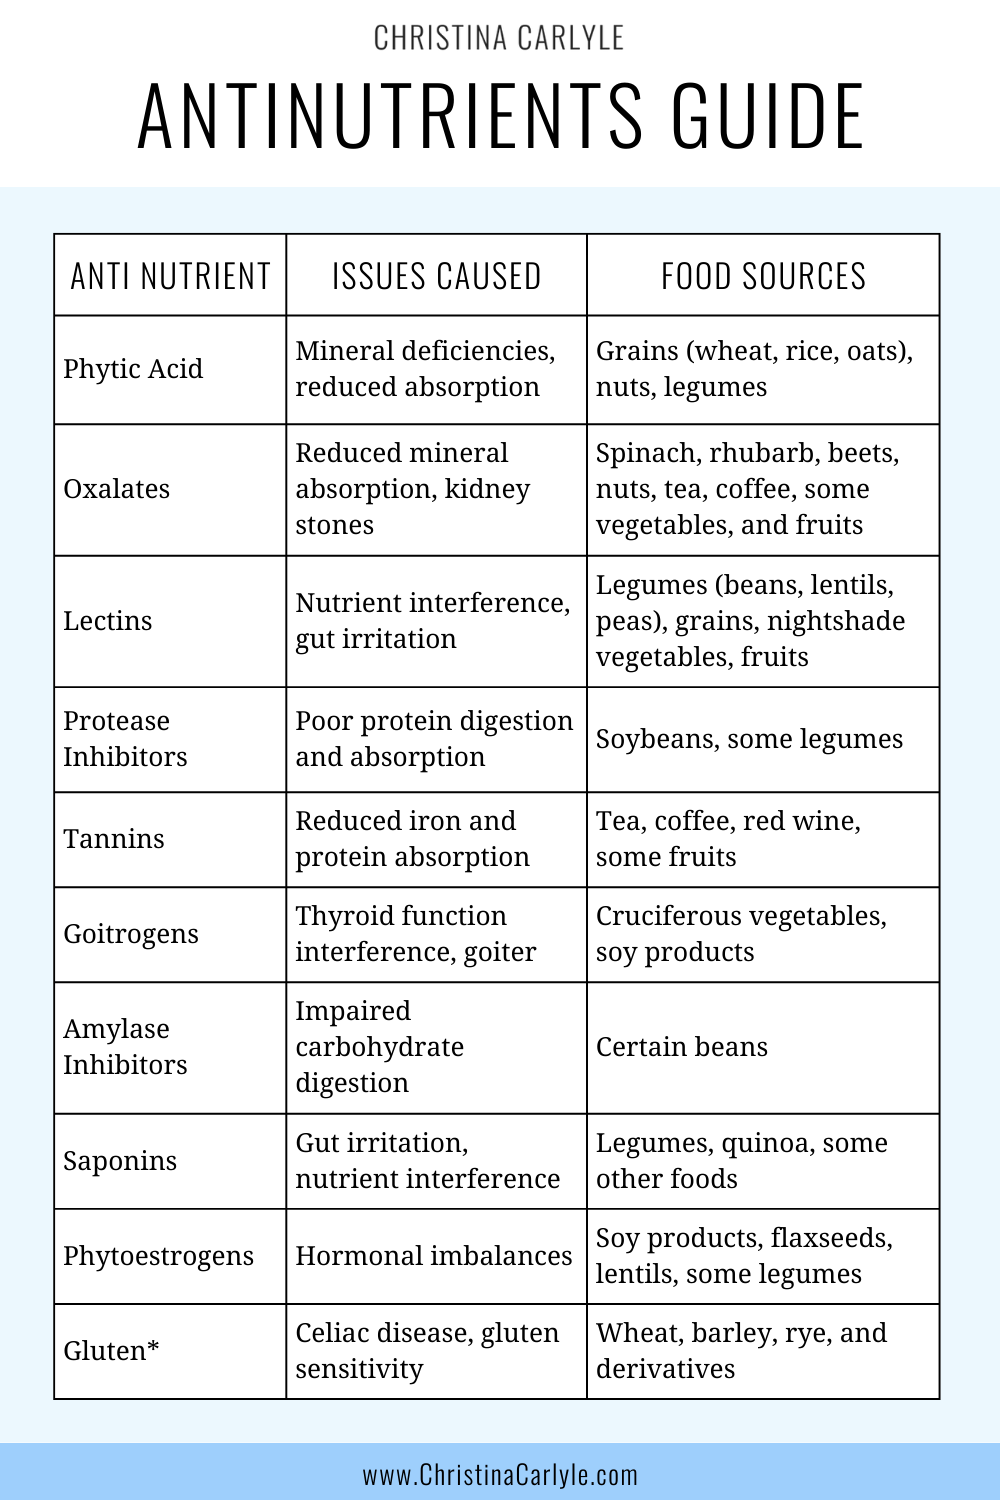 text that says Antinutrients Guide and a chart with the different antinutrients, the issues they cause, and food sources that have them